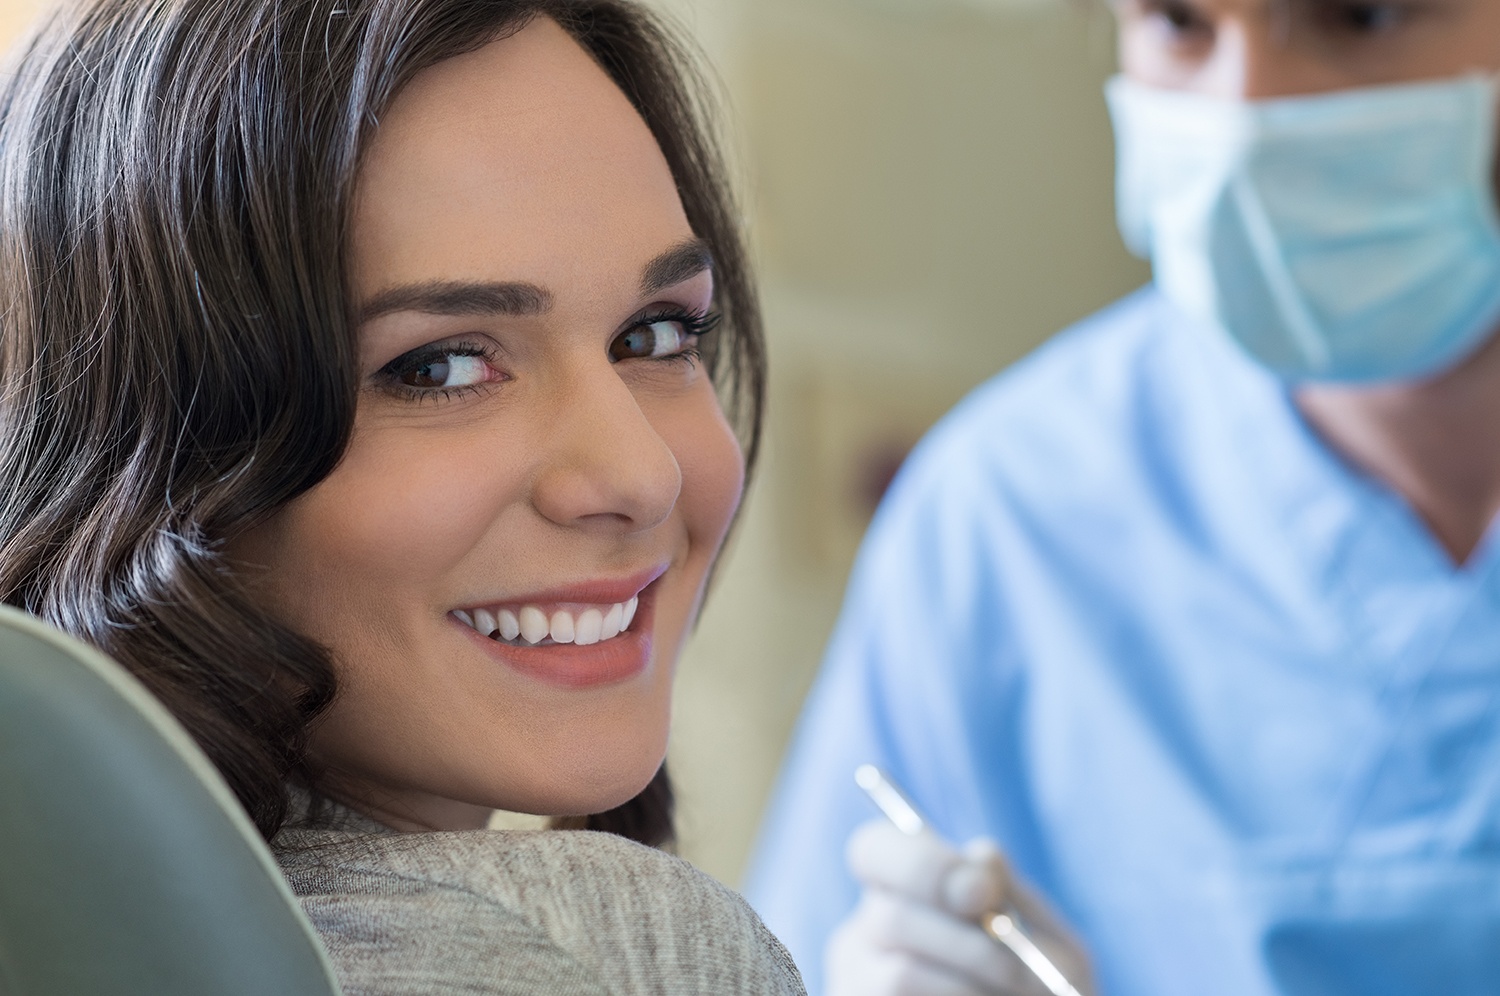 It’s Time To Debunk These Dental Health Myths